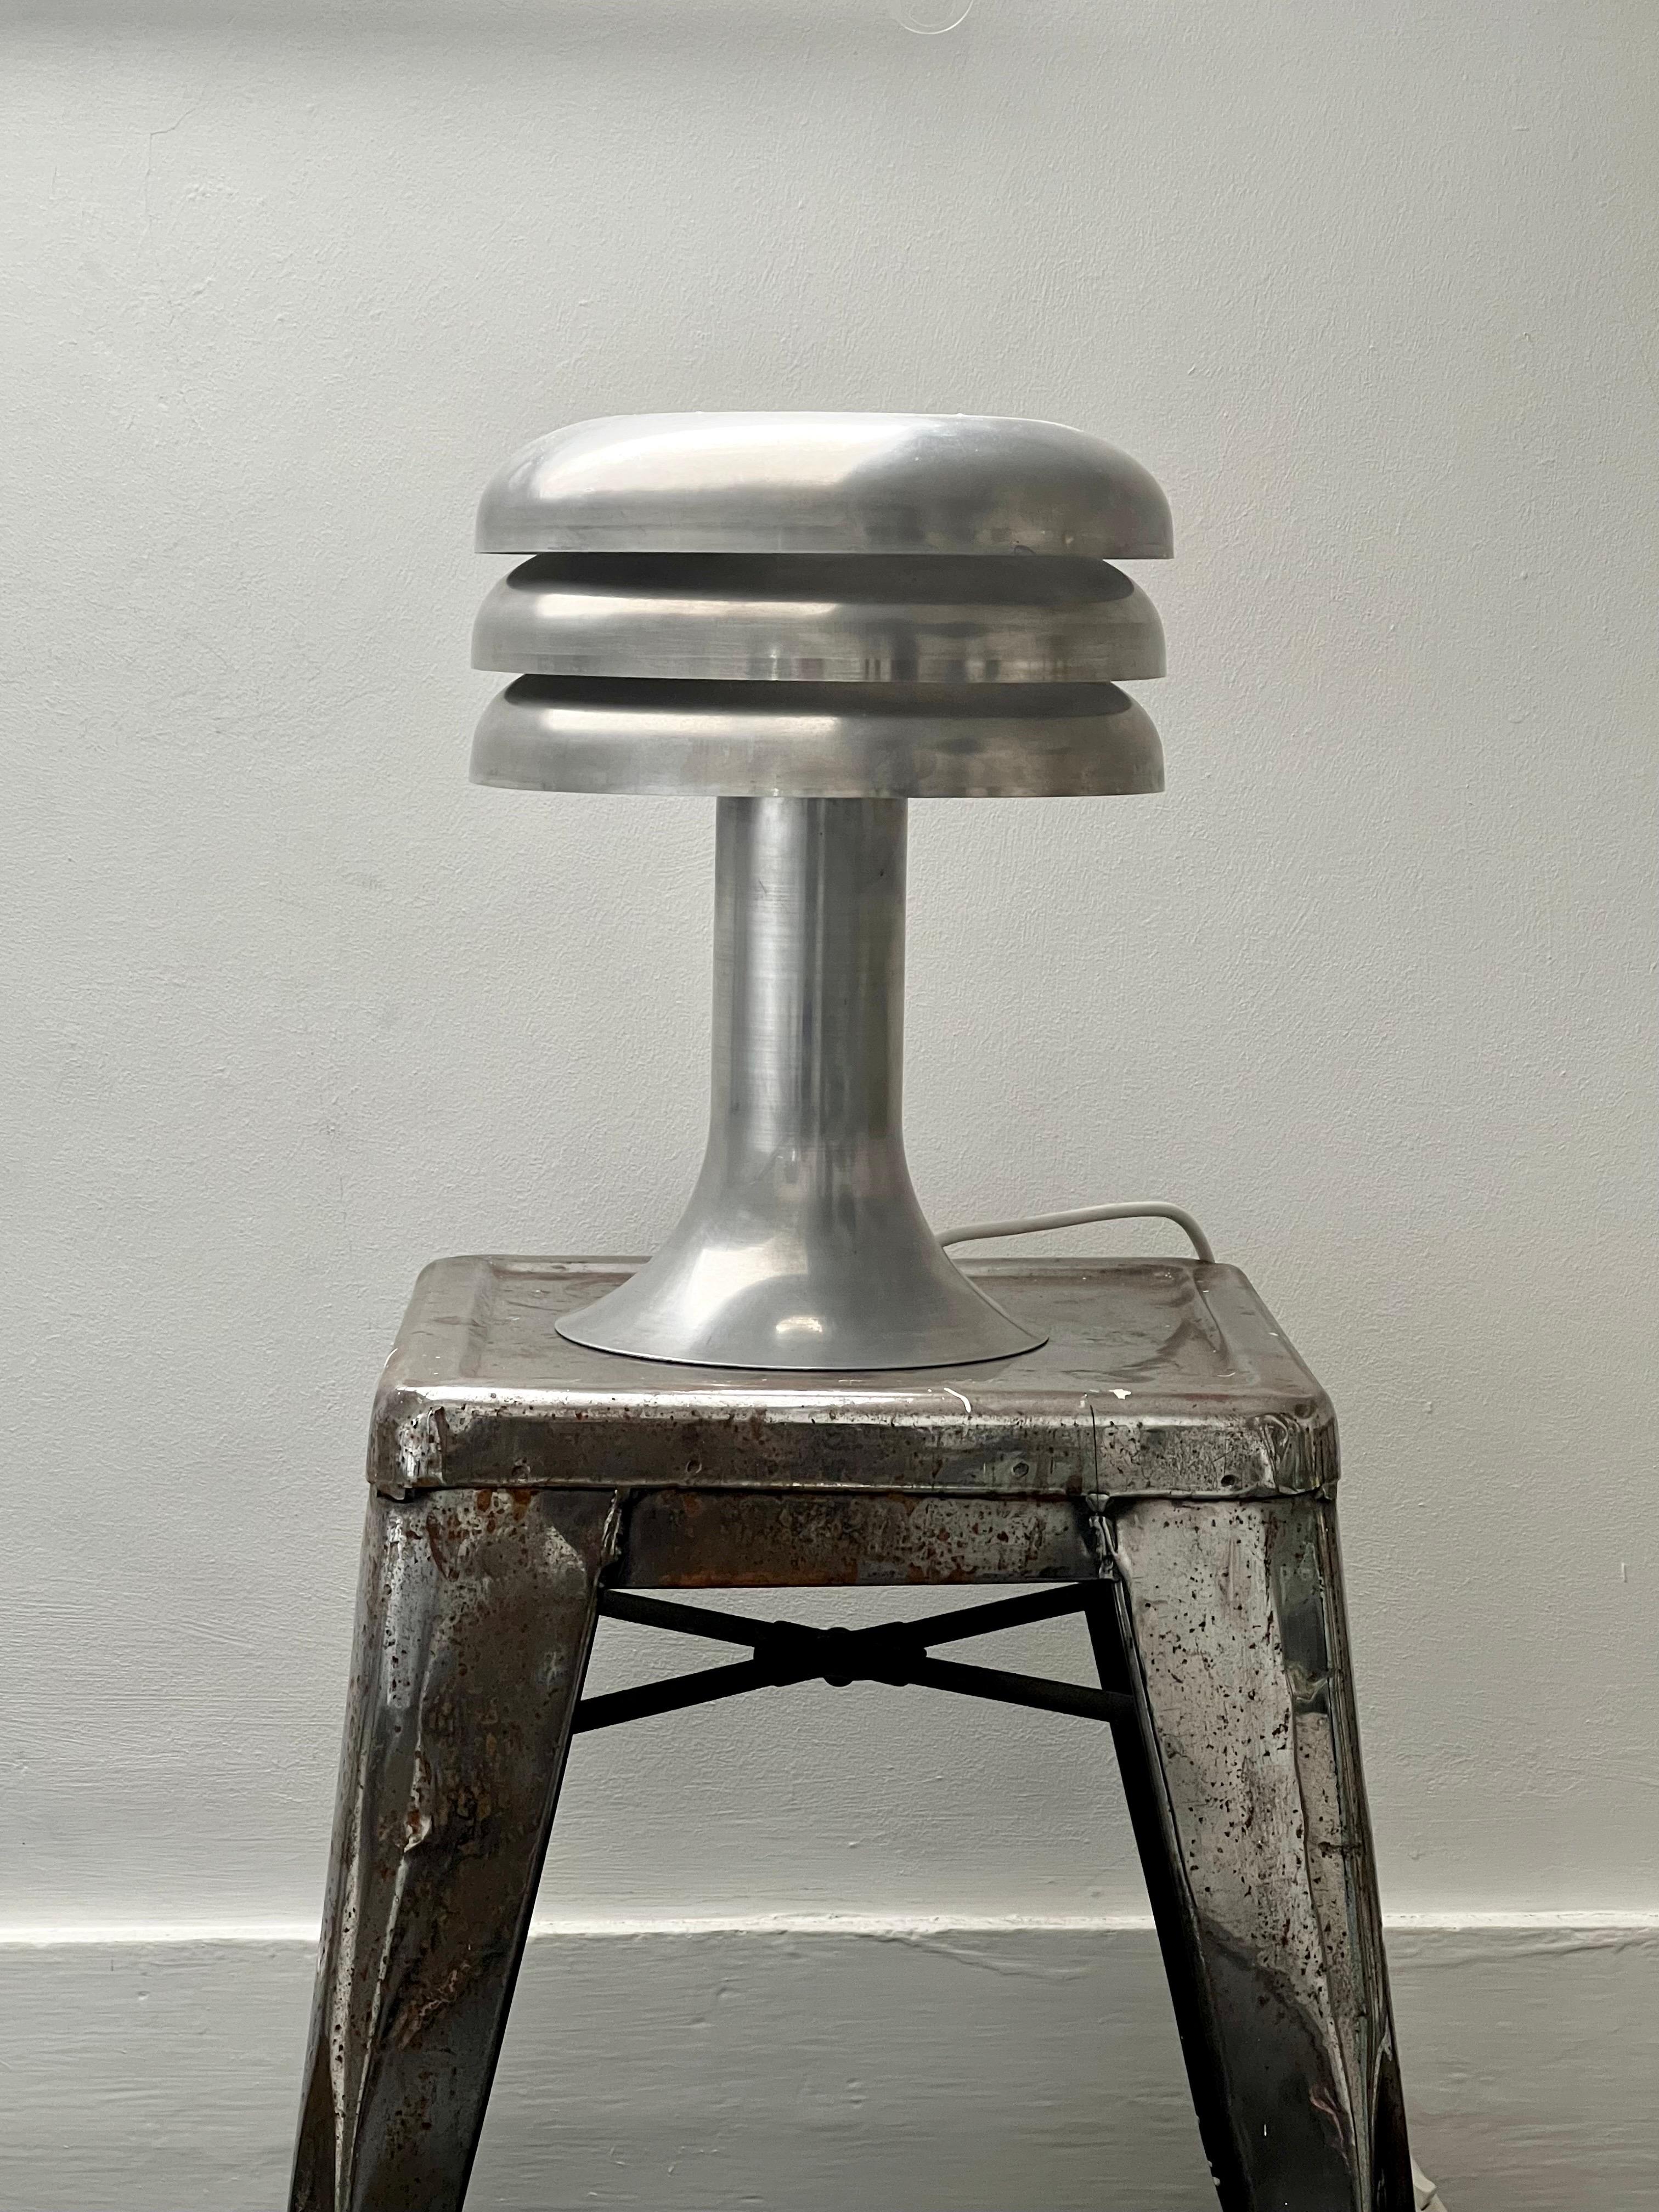 Table lamp model BN-25 by Hans Agne Jakobsson, Sweden, 1960s. 

Spun aluminium lamp with integrated three-tiered shade (white inside) giving nice ambient light. The lamp is in good vintage condition. It was refinished some years ago; it is